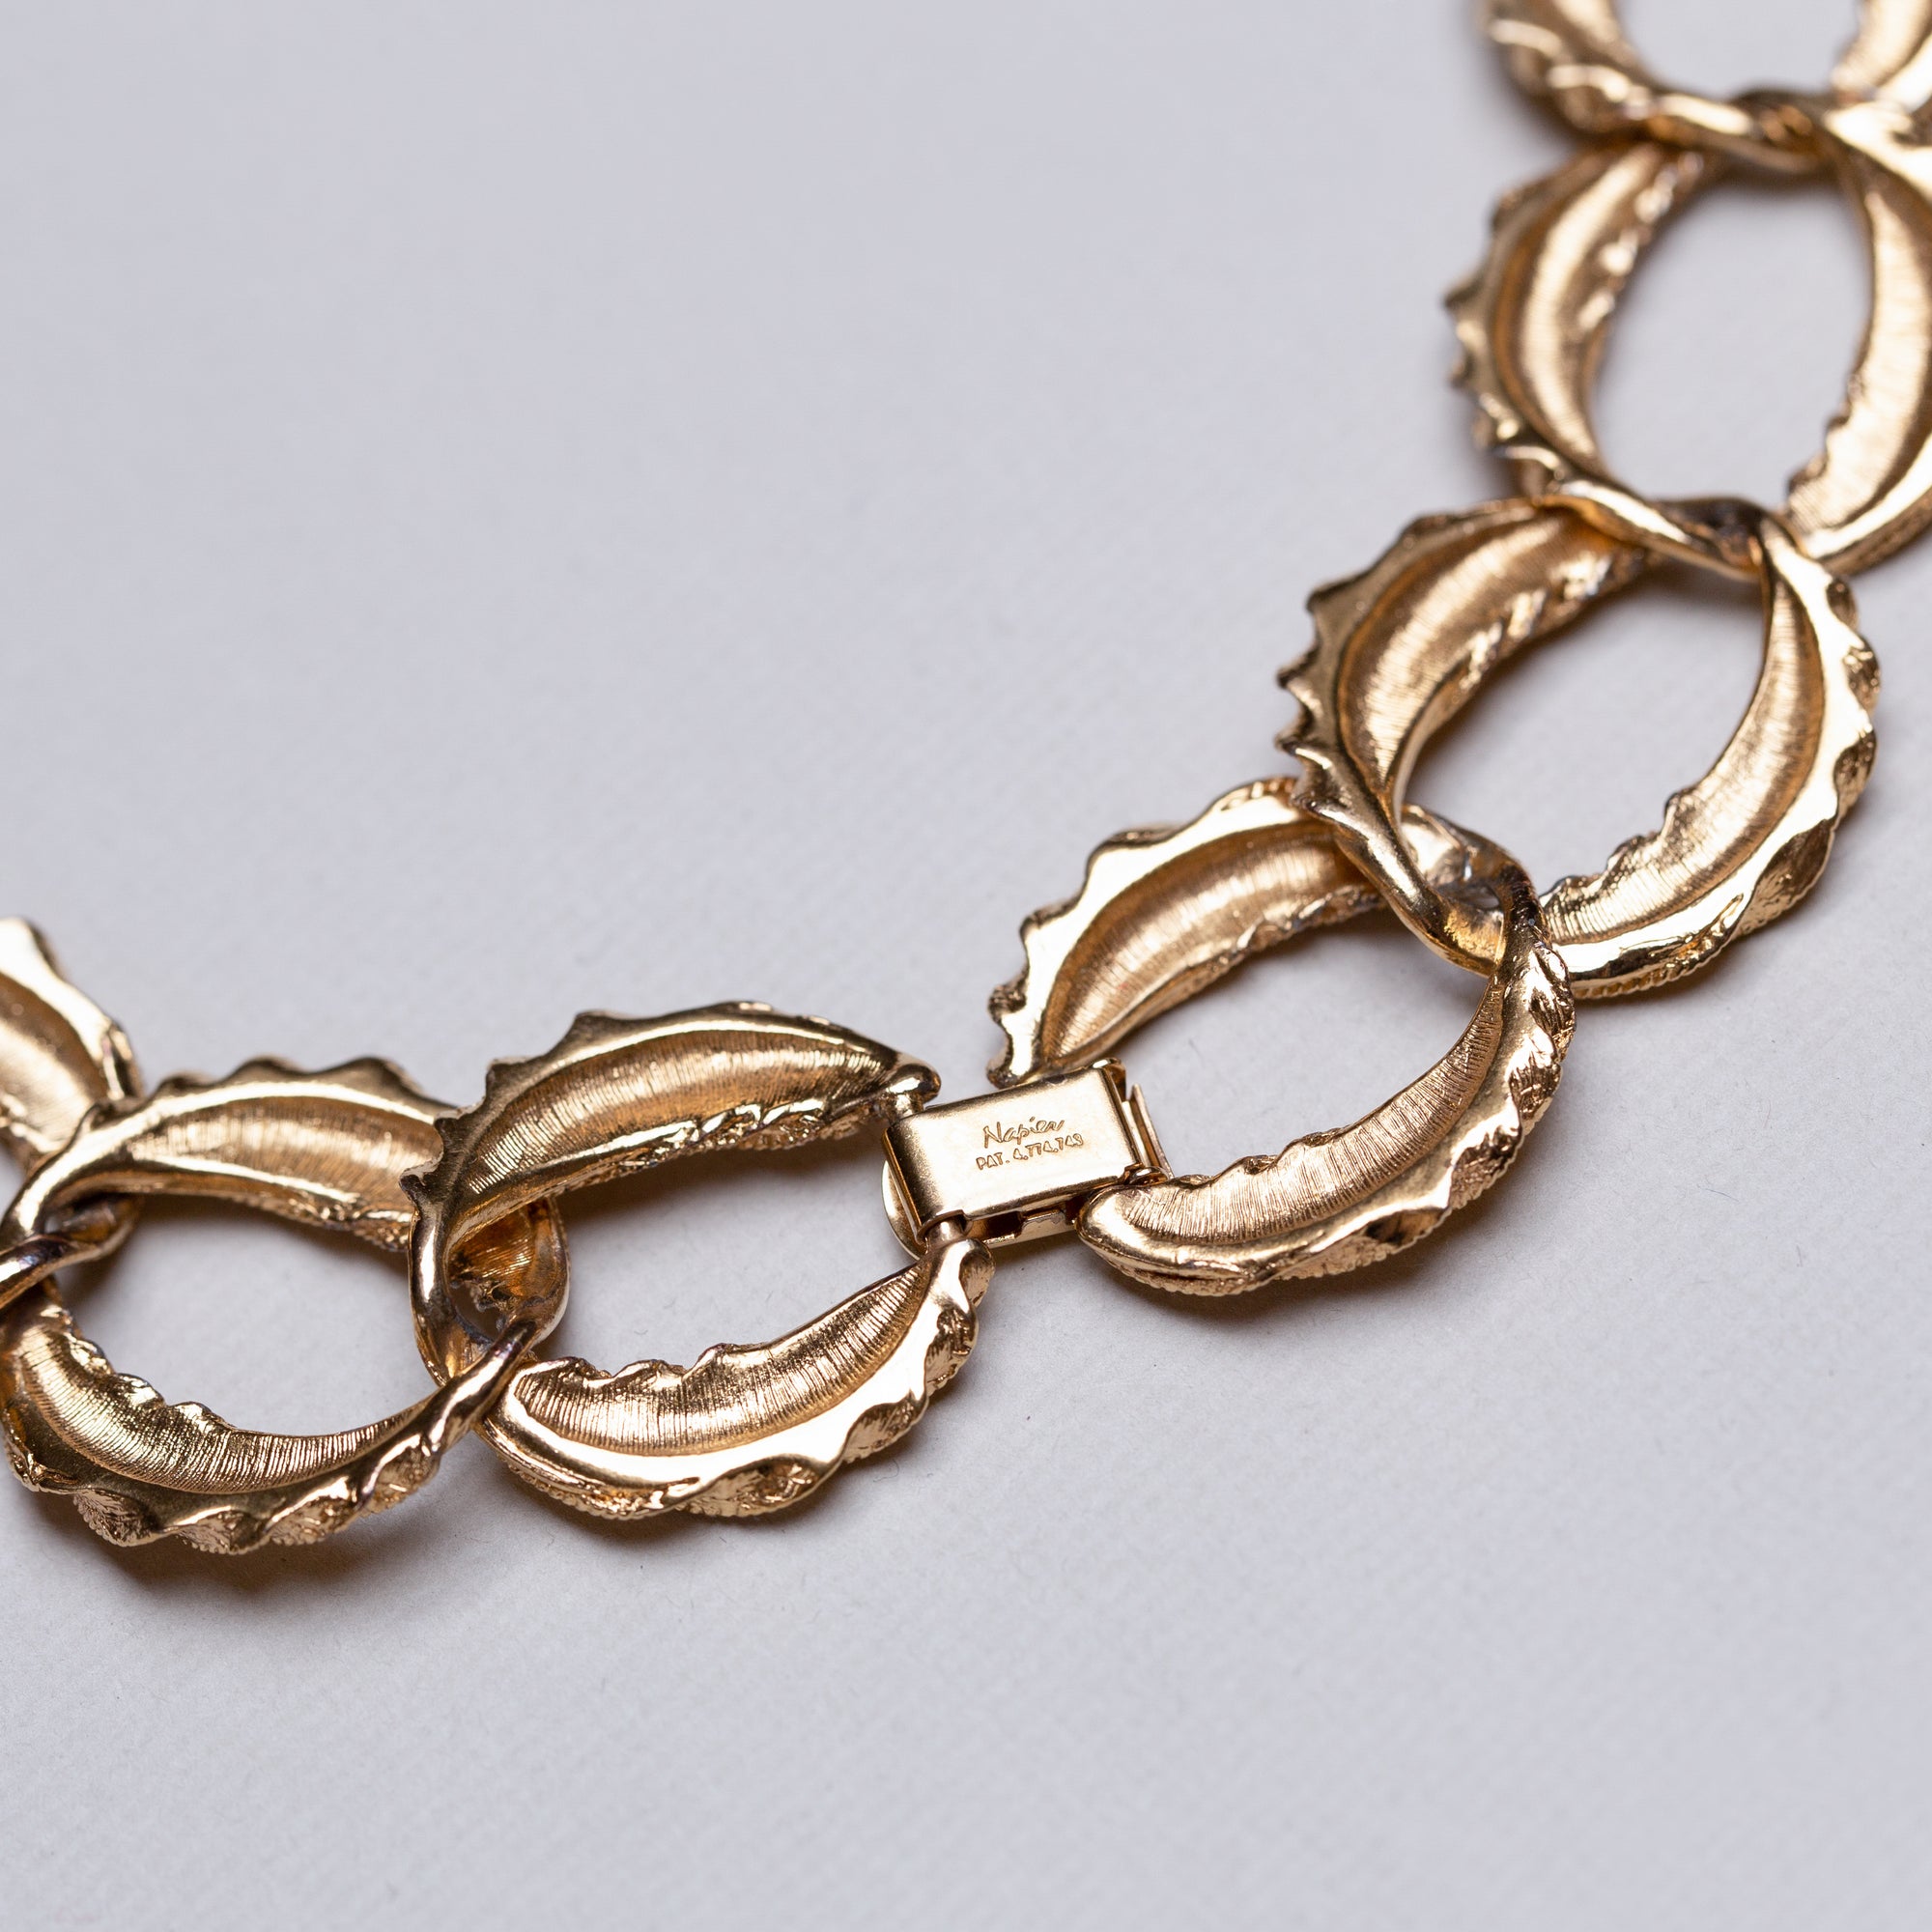 Vintage Textured Gold Chain Necklace